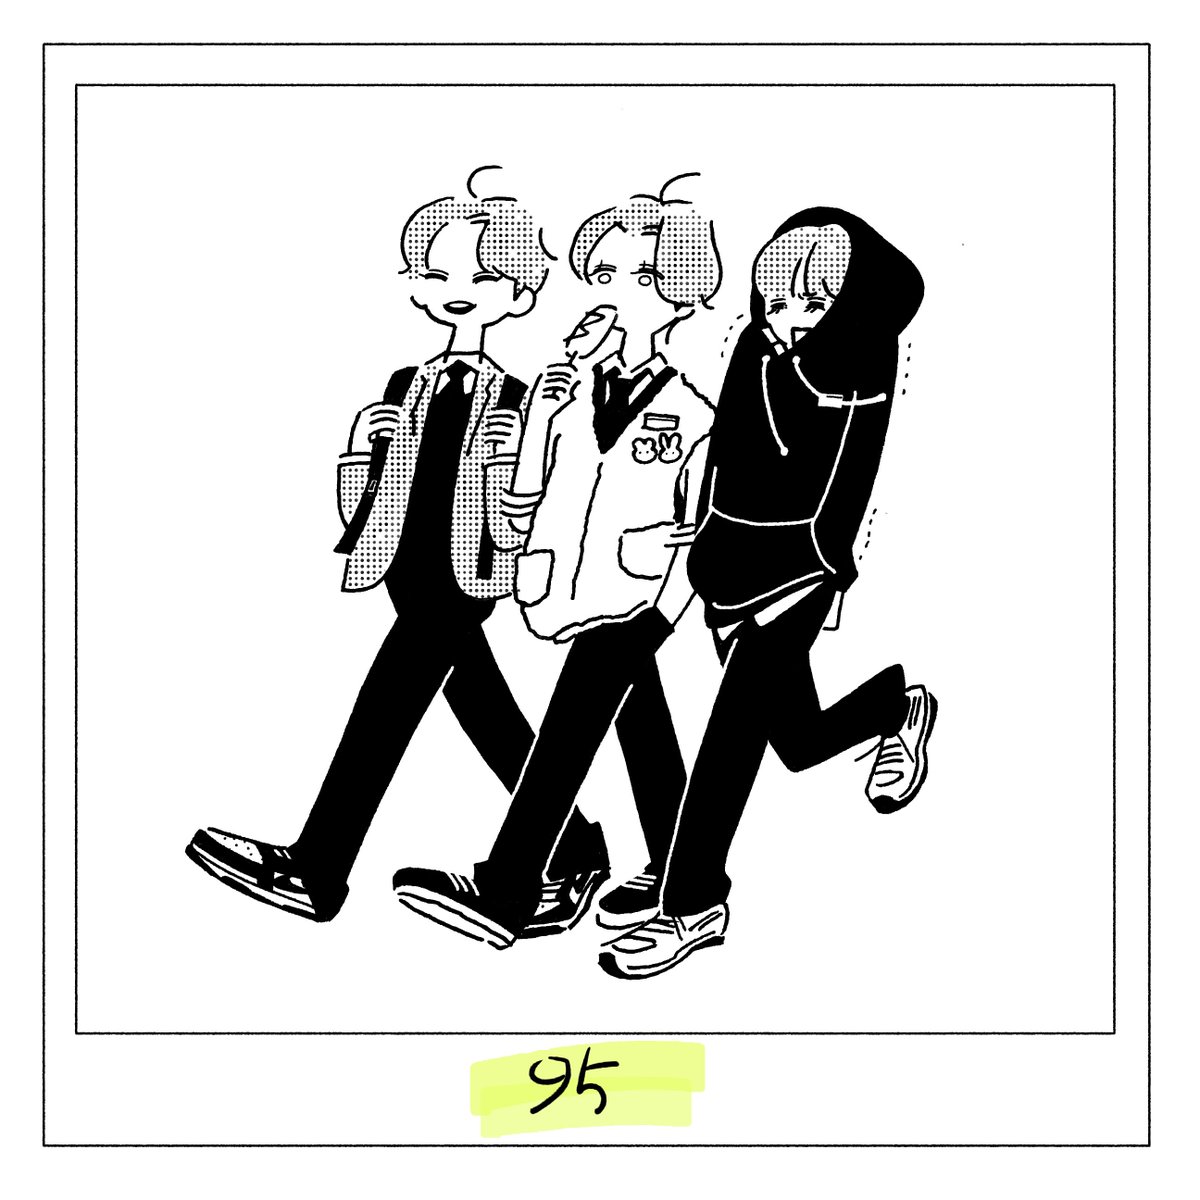 95line.
(Inspired by GOING SEVENTEEN SPECIAL "I know & Don't know # 1")
#seventeenfanart 